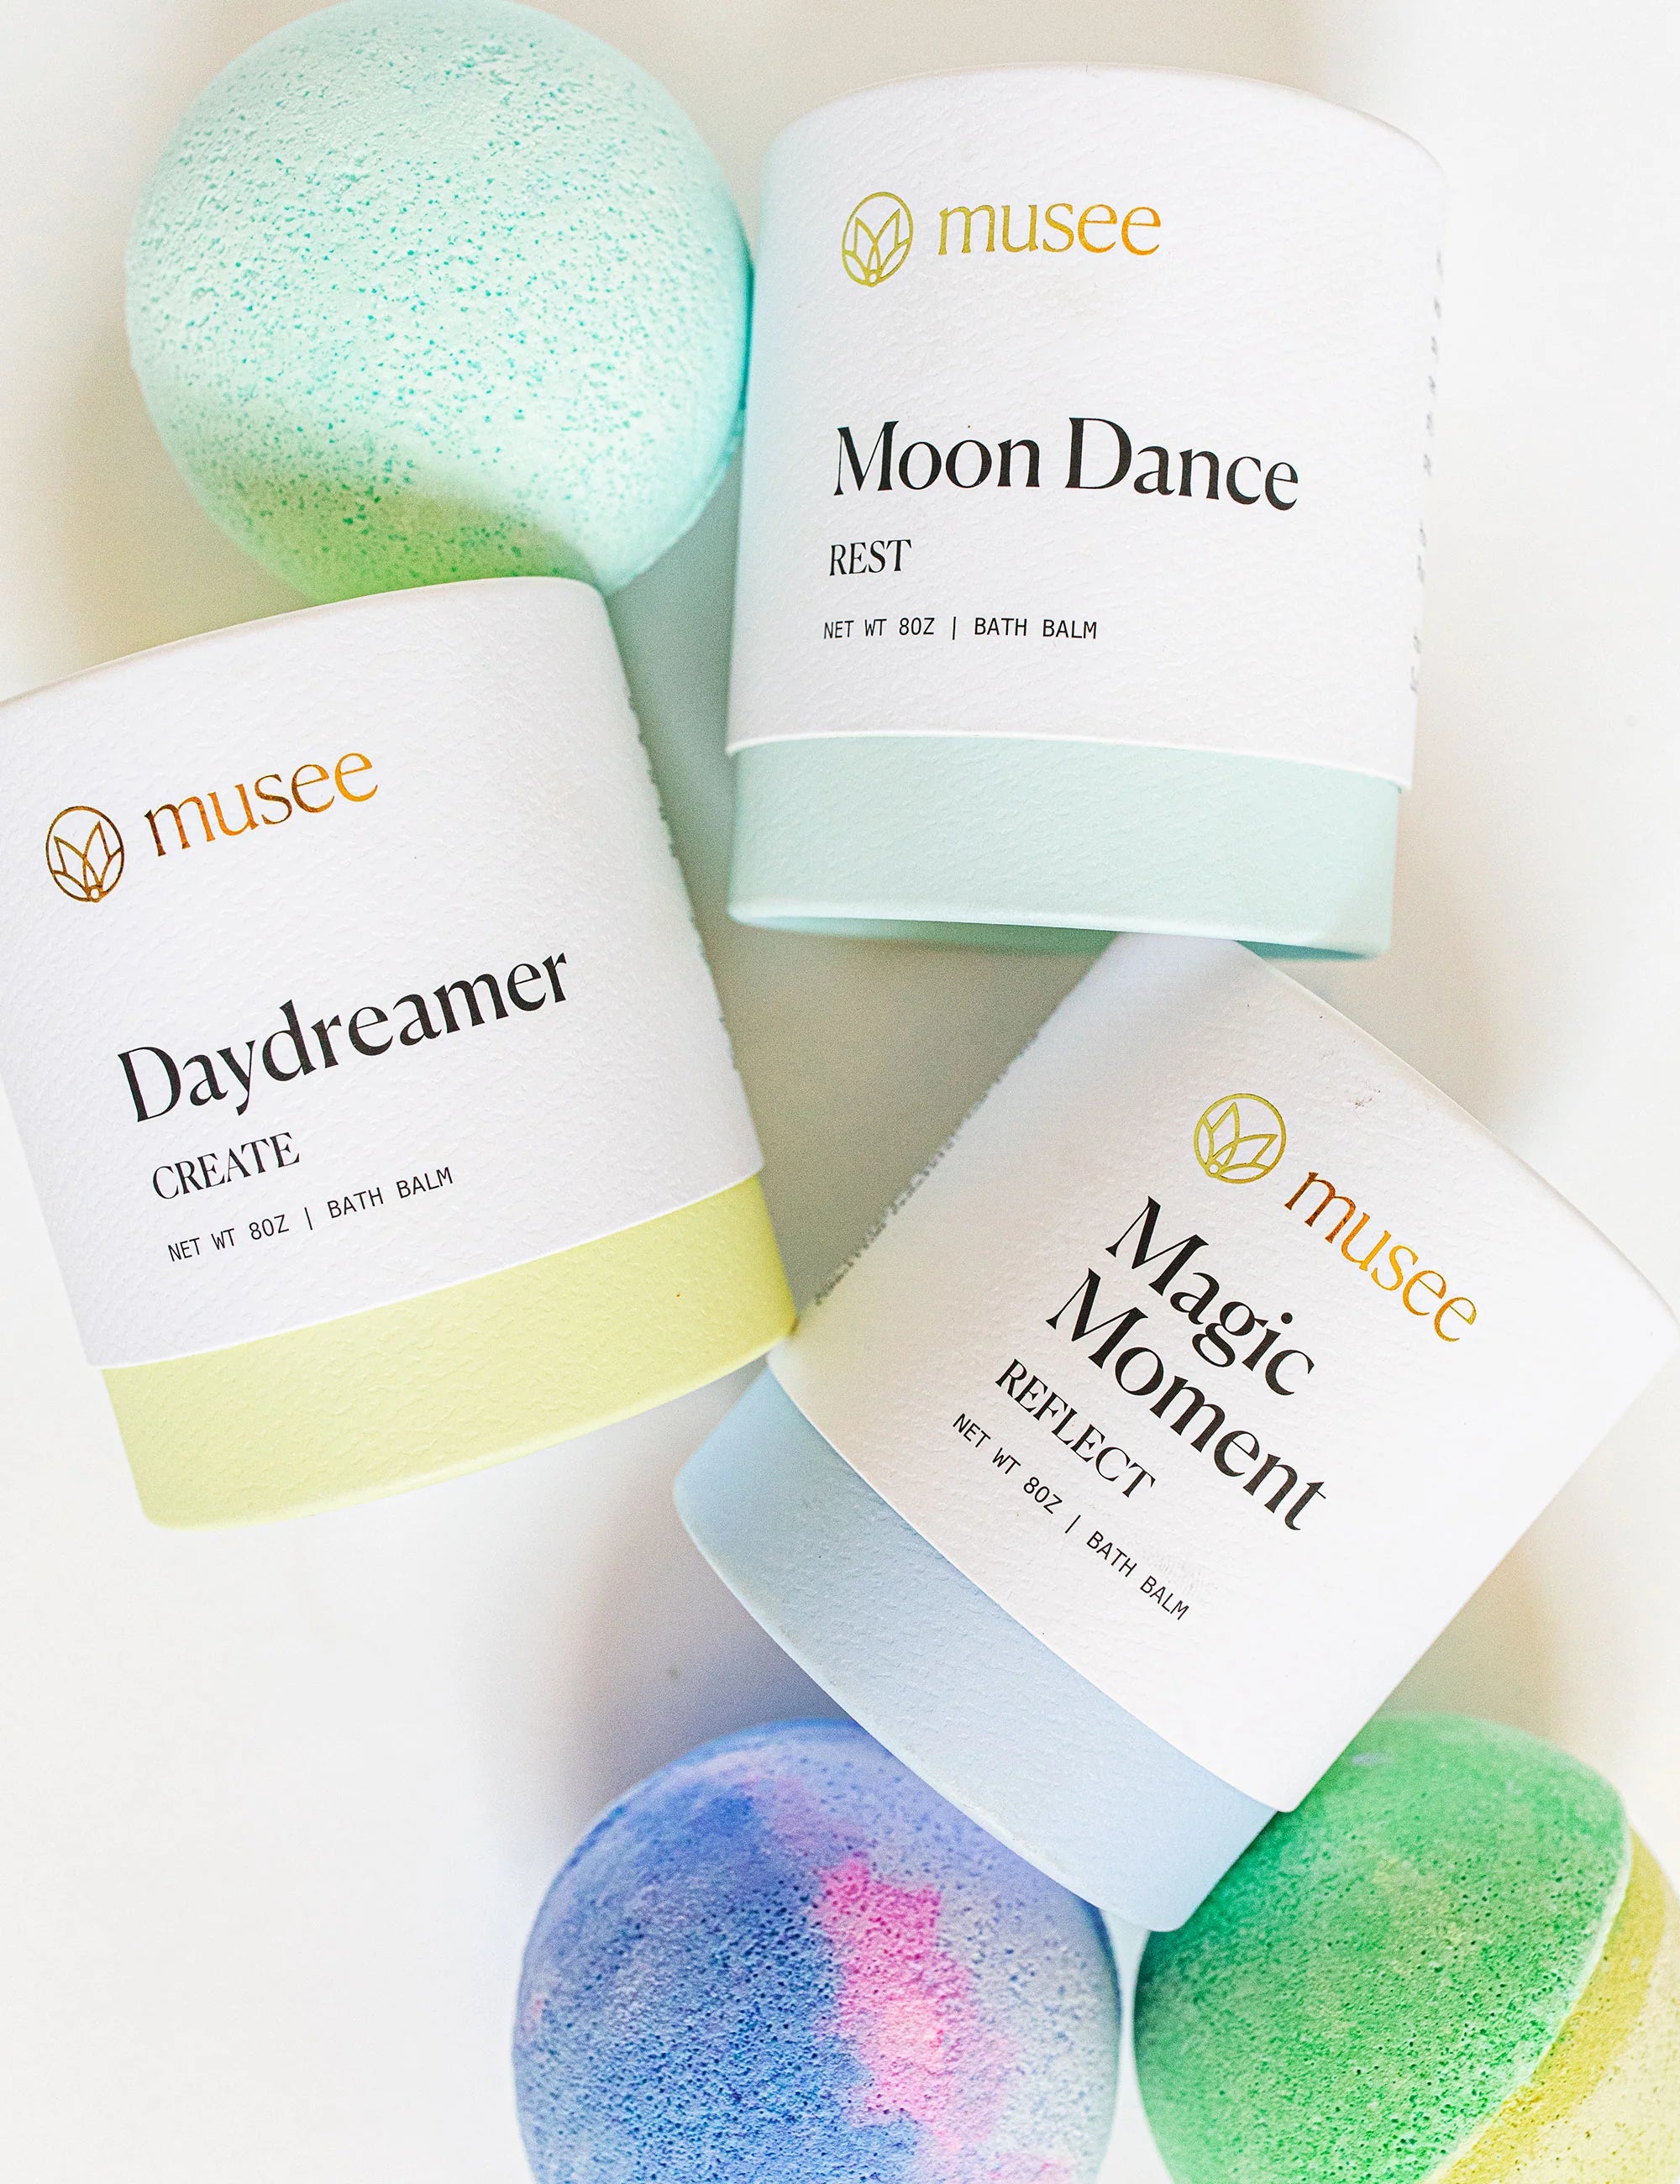 Musee Bath Balms: Daydreamer Therapy